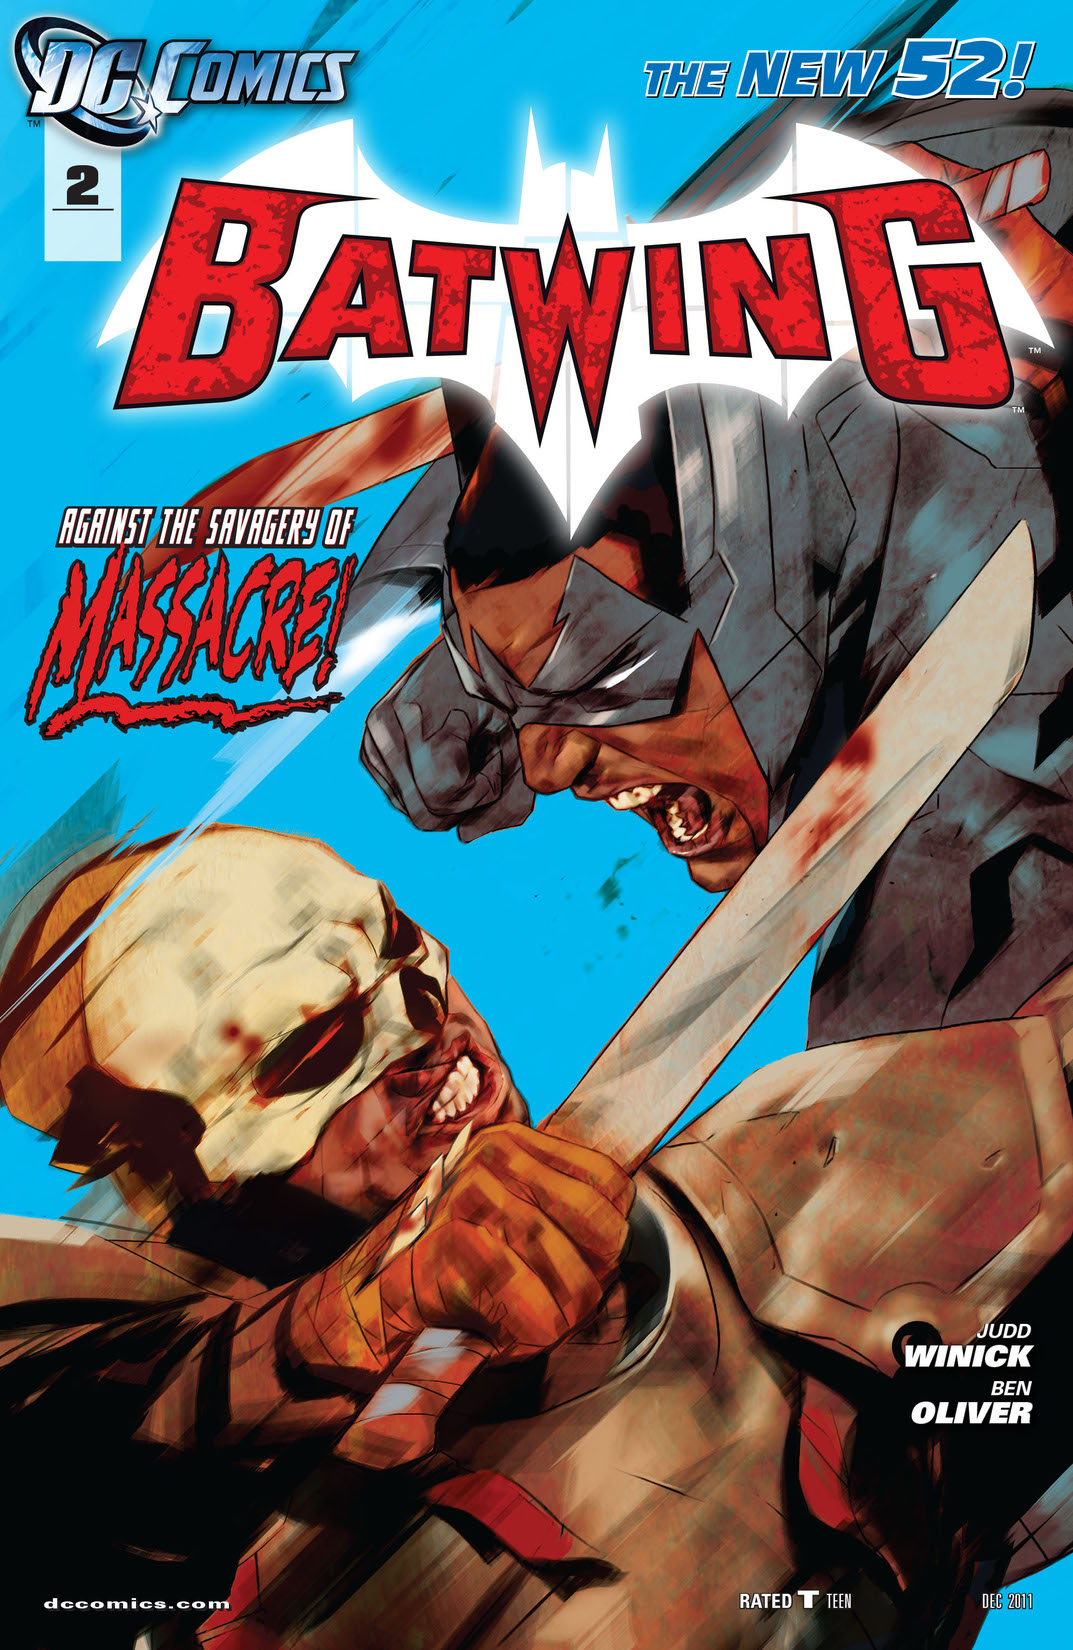 Batwing #2 preview images